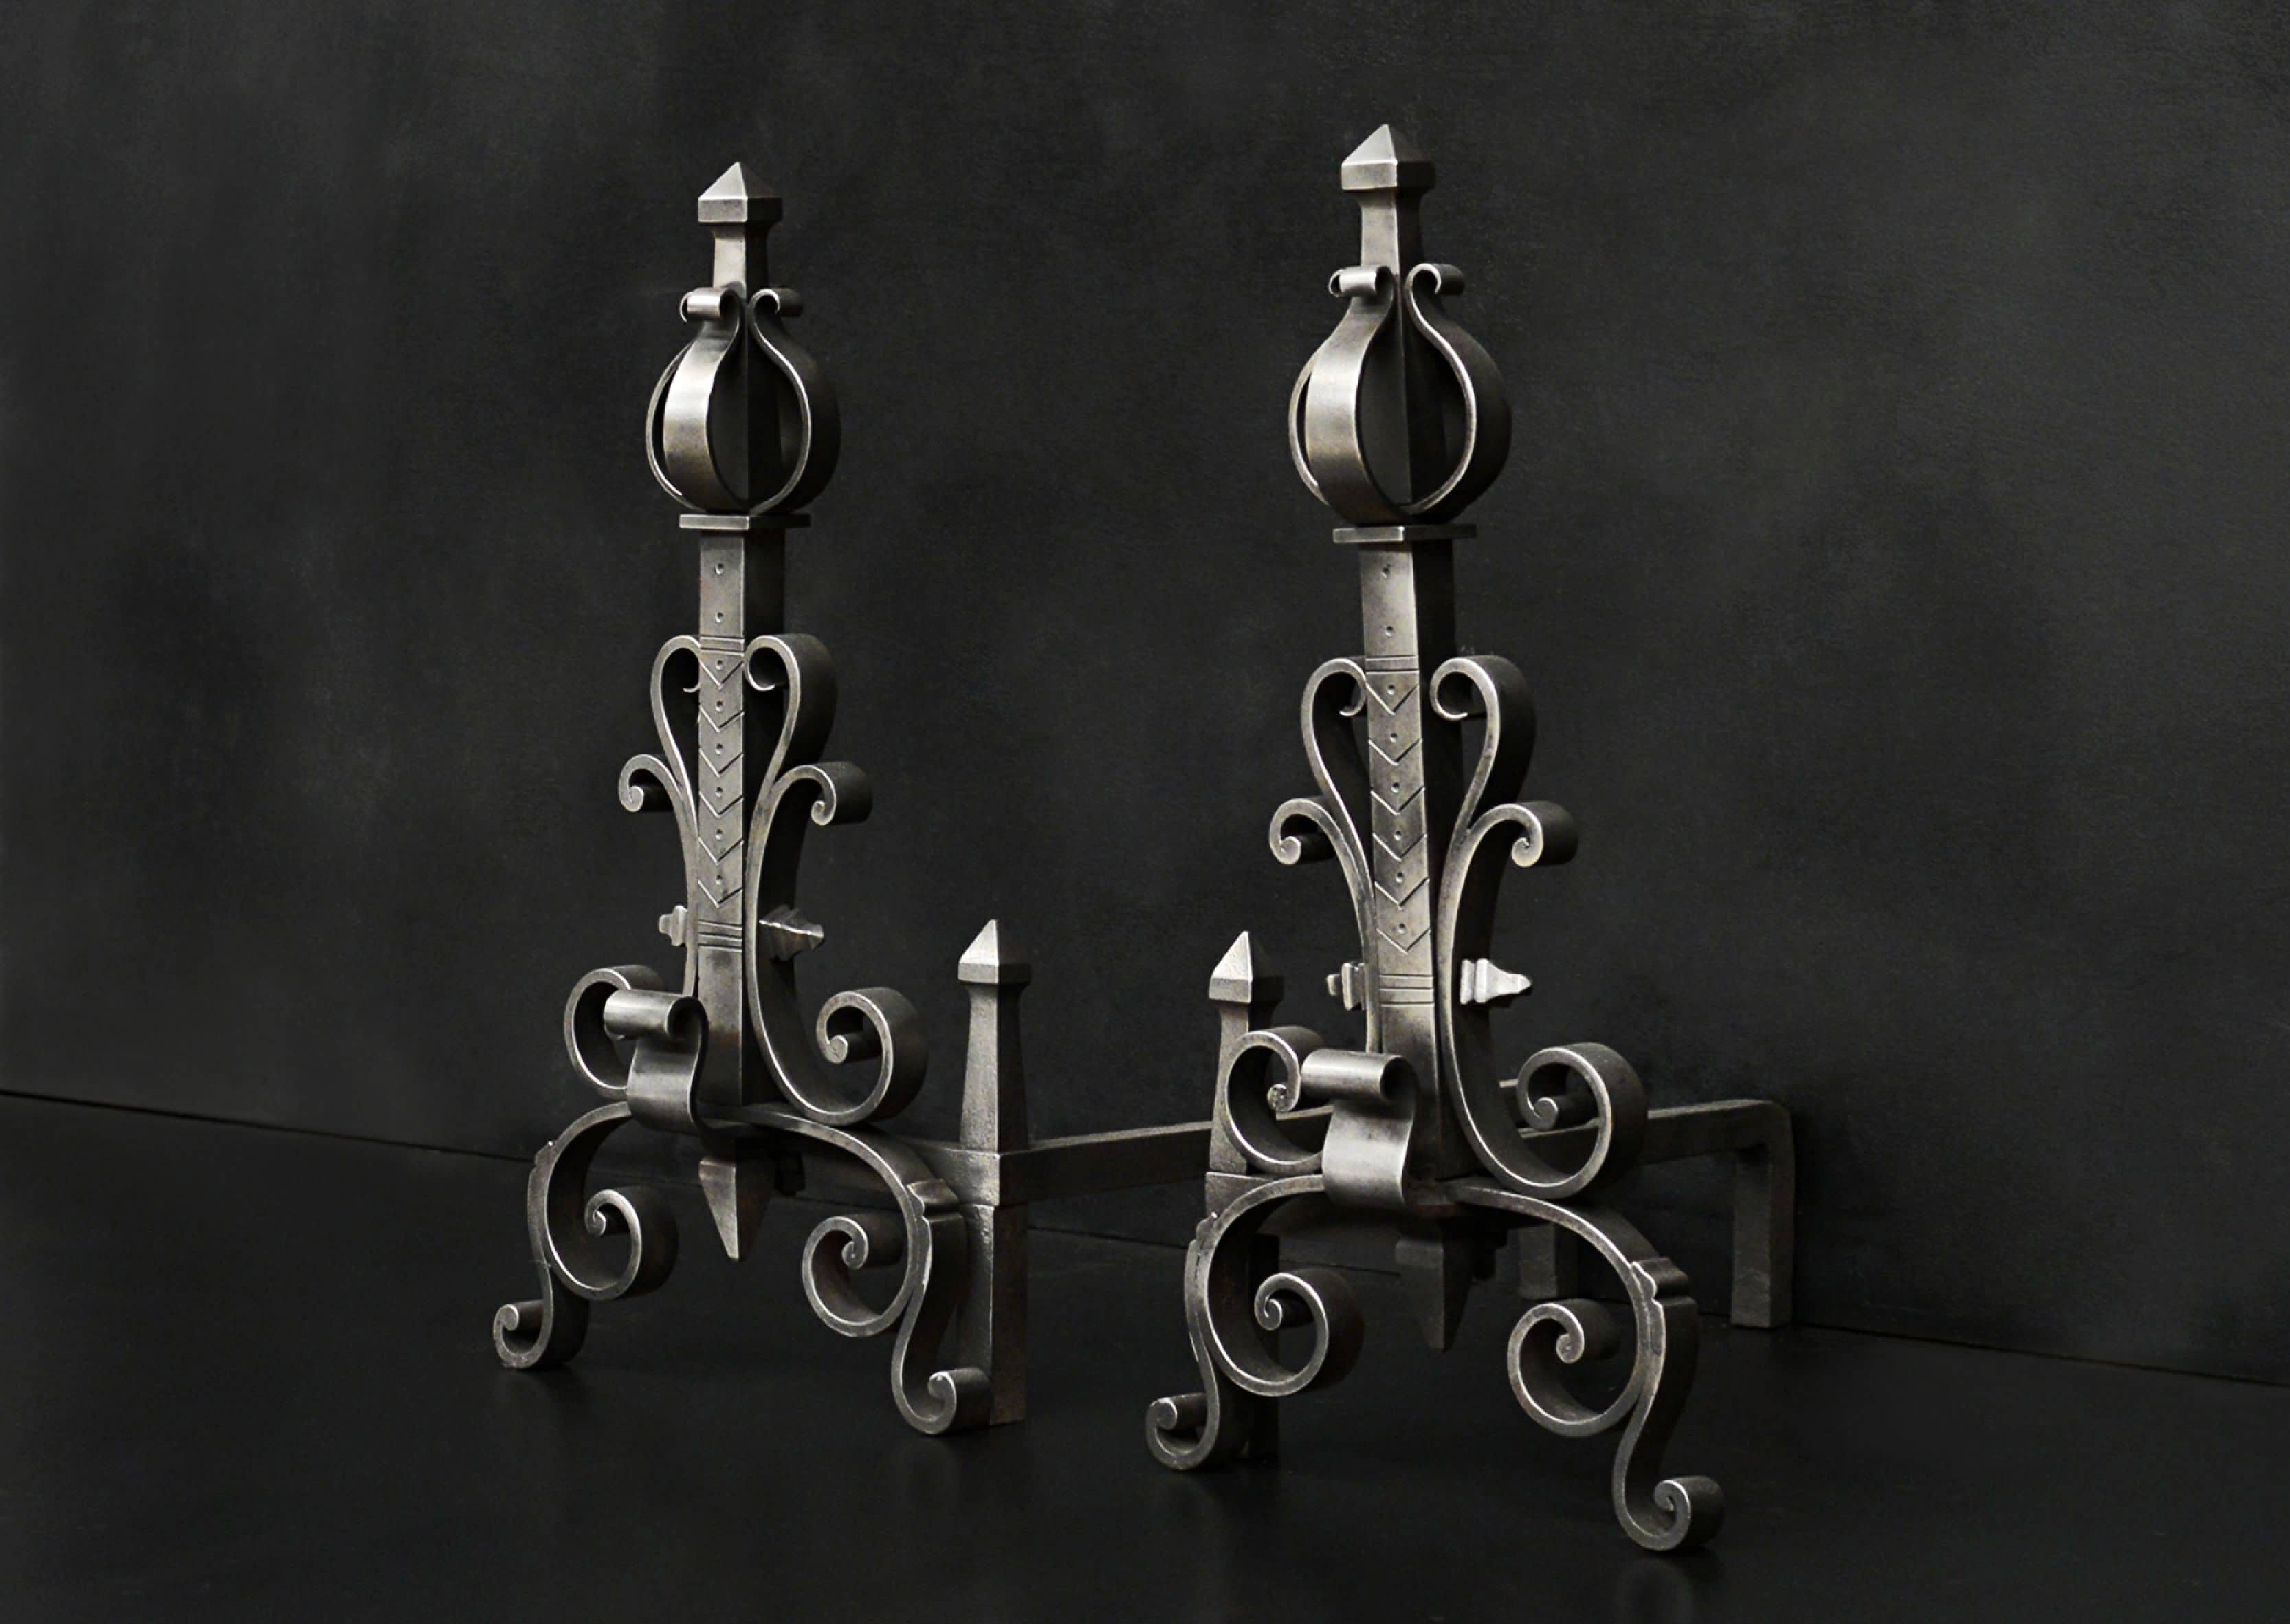 A pair of polished steel firedogs with scrollwork throughout and engraved shafts. English, late 19th/early 20th century.

Measures: Height: 570 mm 22 ½